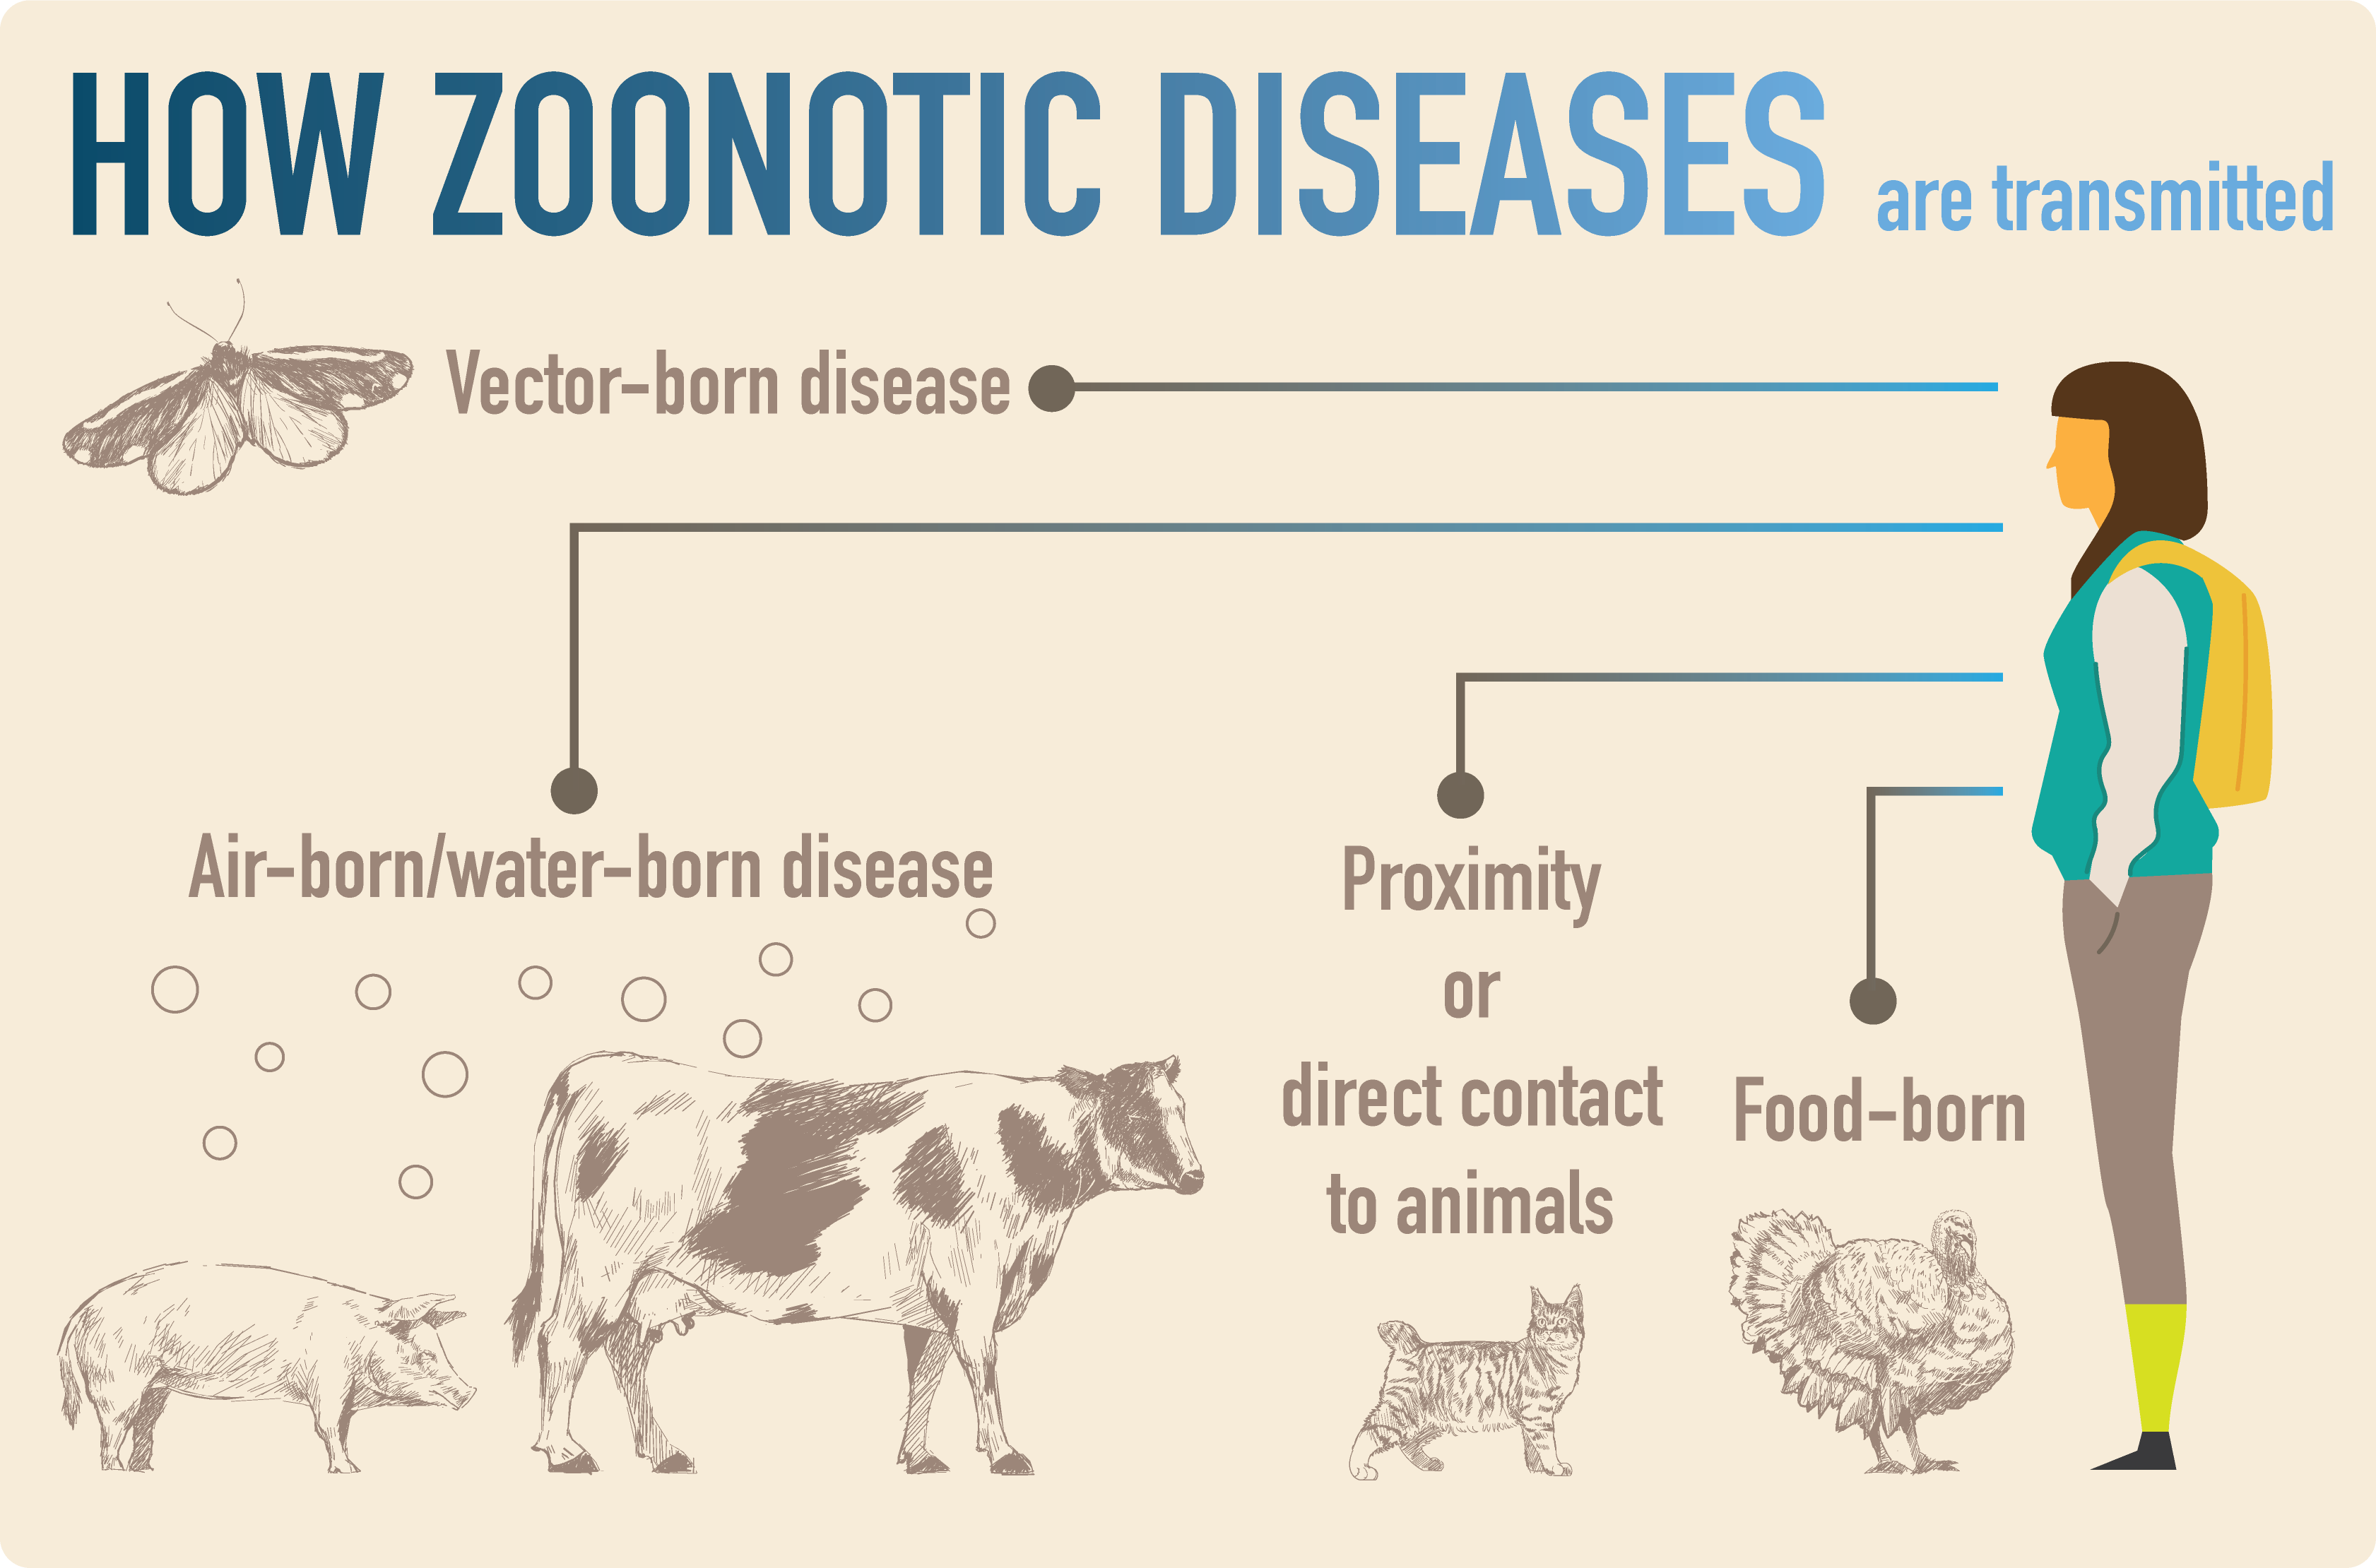 Climate: Past, Present & Future | Are the risks of zoonotic diseases